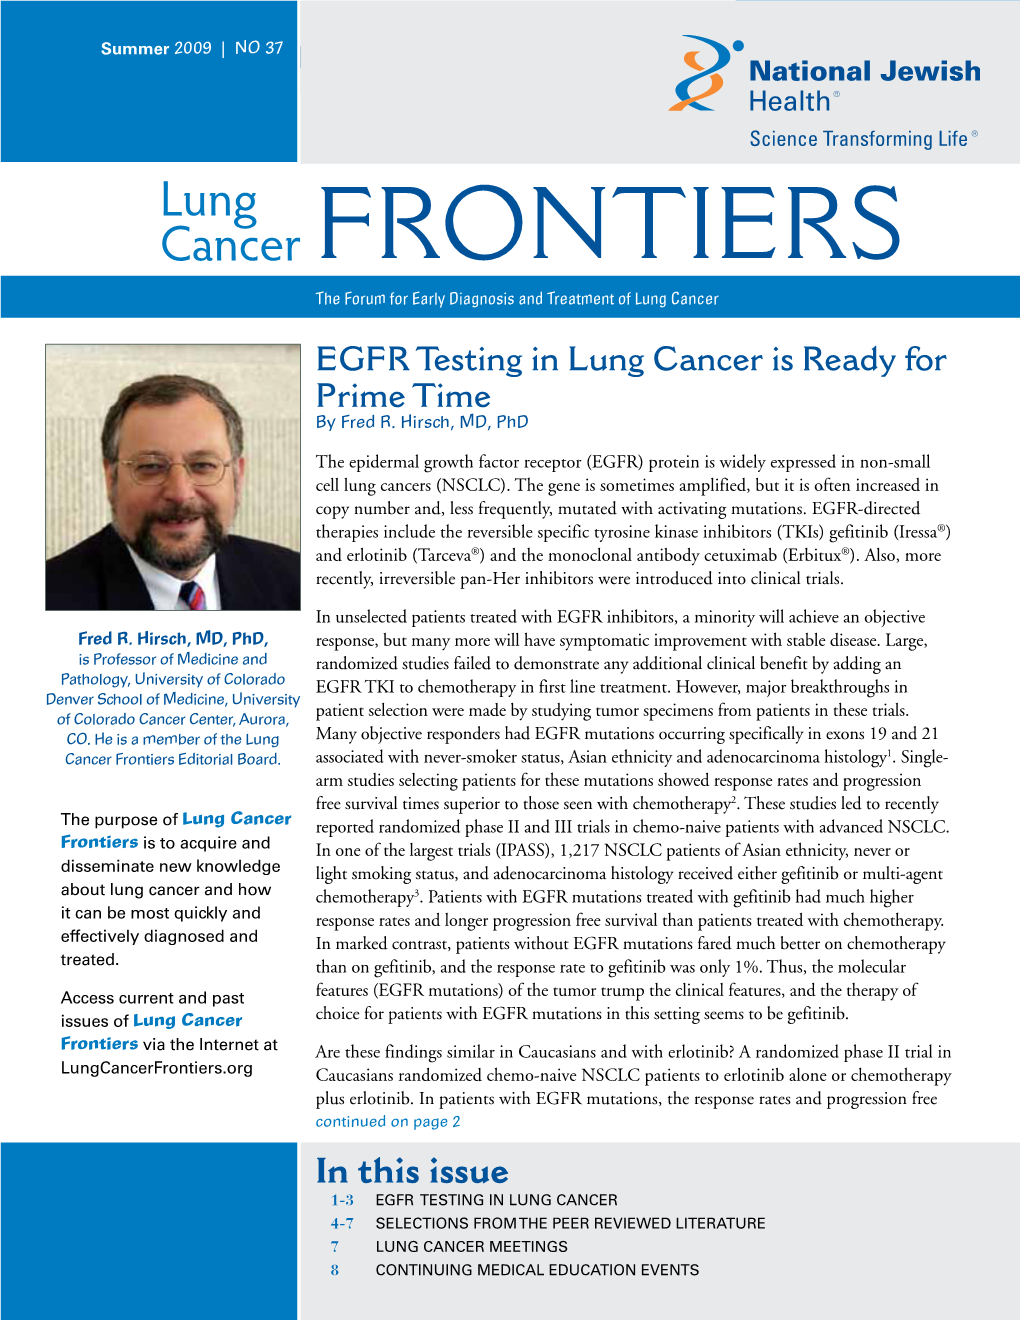 Lung Cancer Frontiers the Forum for Early Diagnosis and Treatment of Lung Cancer